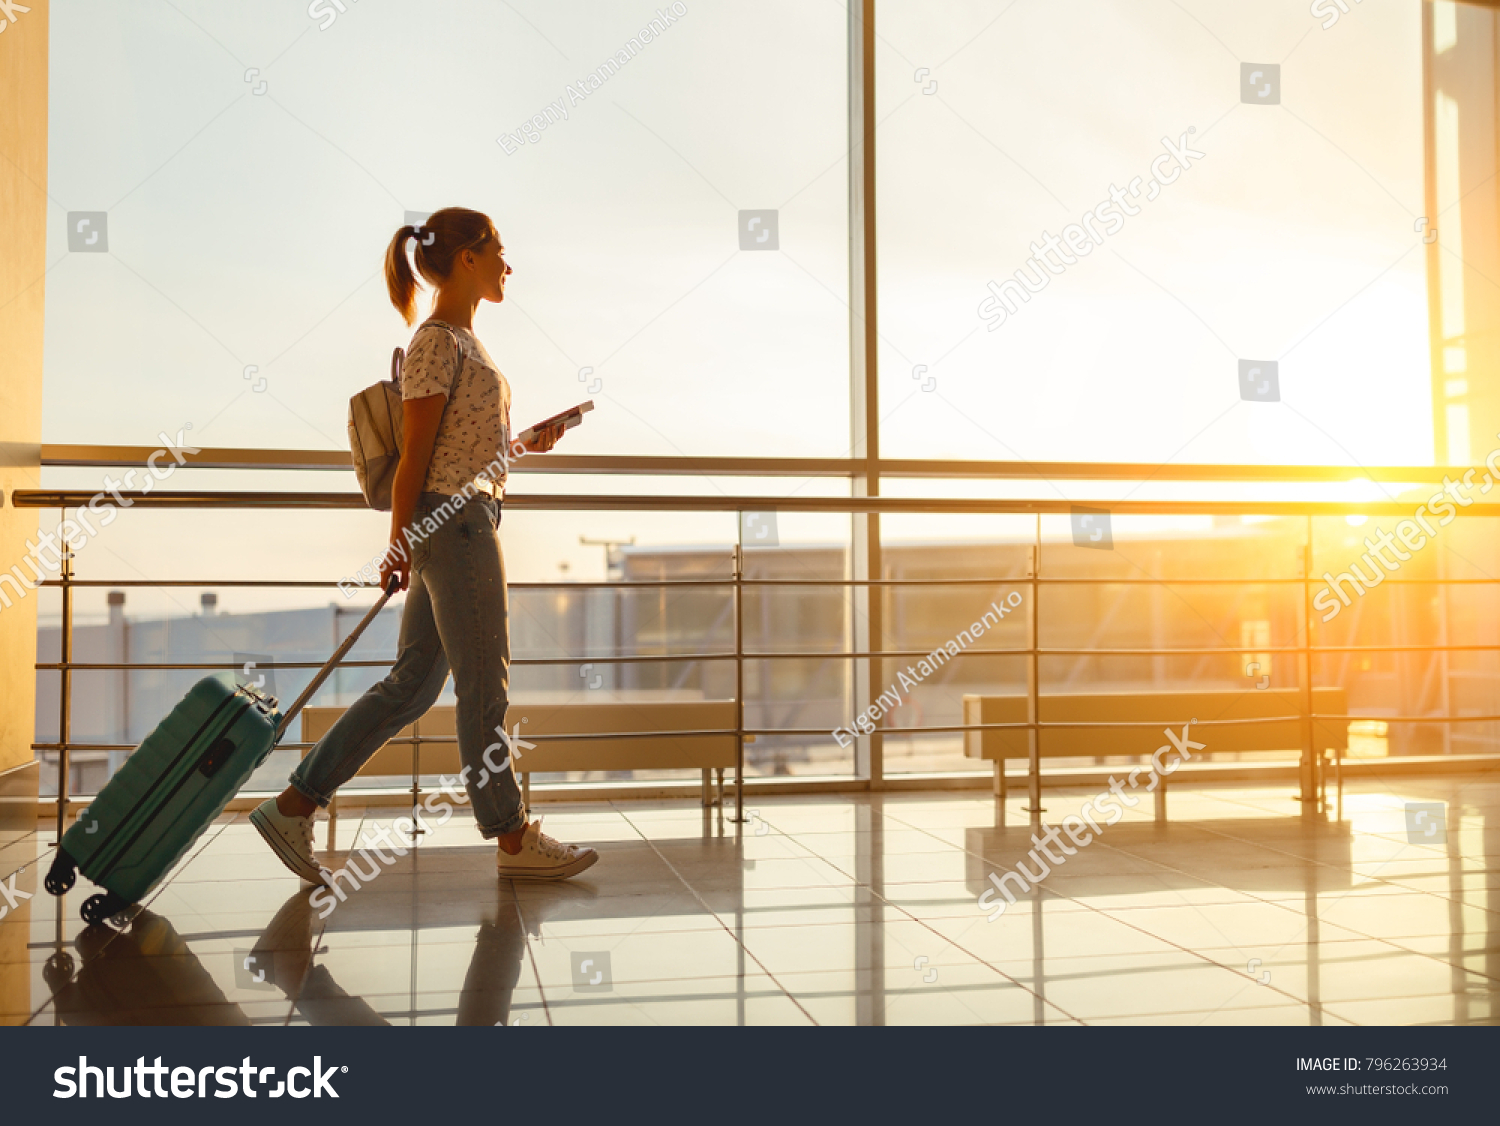 young woman goes  at airport  at window  with a suitcase waiting for  plane
 #796263934